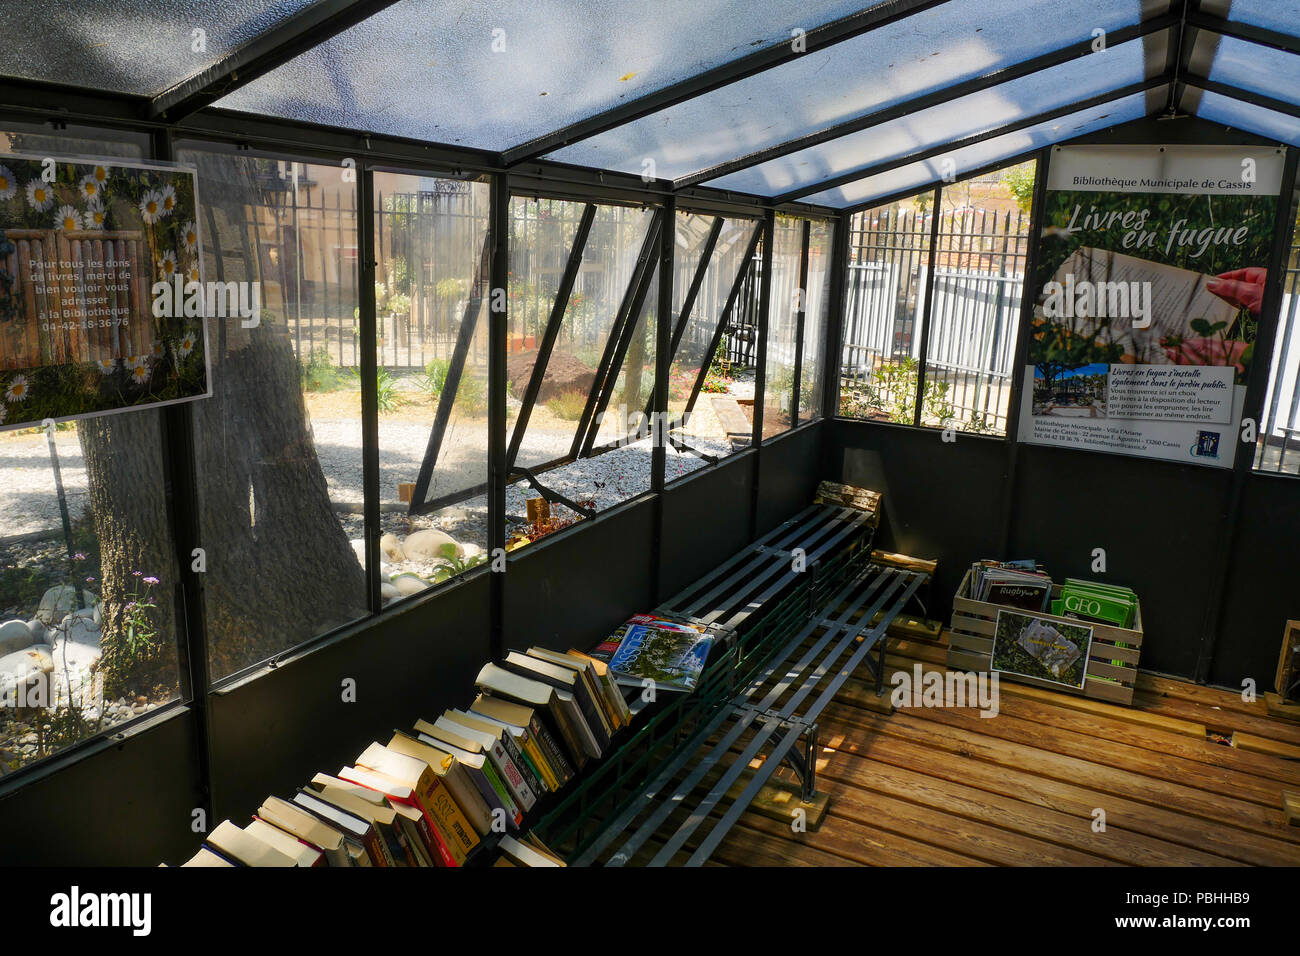 A greenhouse transformed into public library, Cassis, Bouches-du-Rhône,  France Stock Photo - Alamy